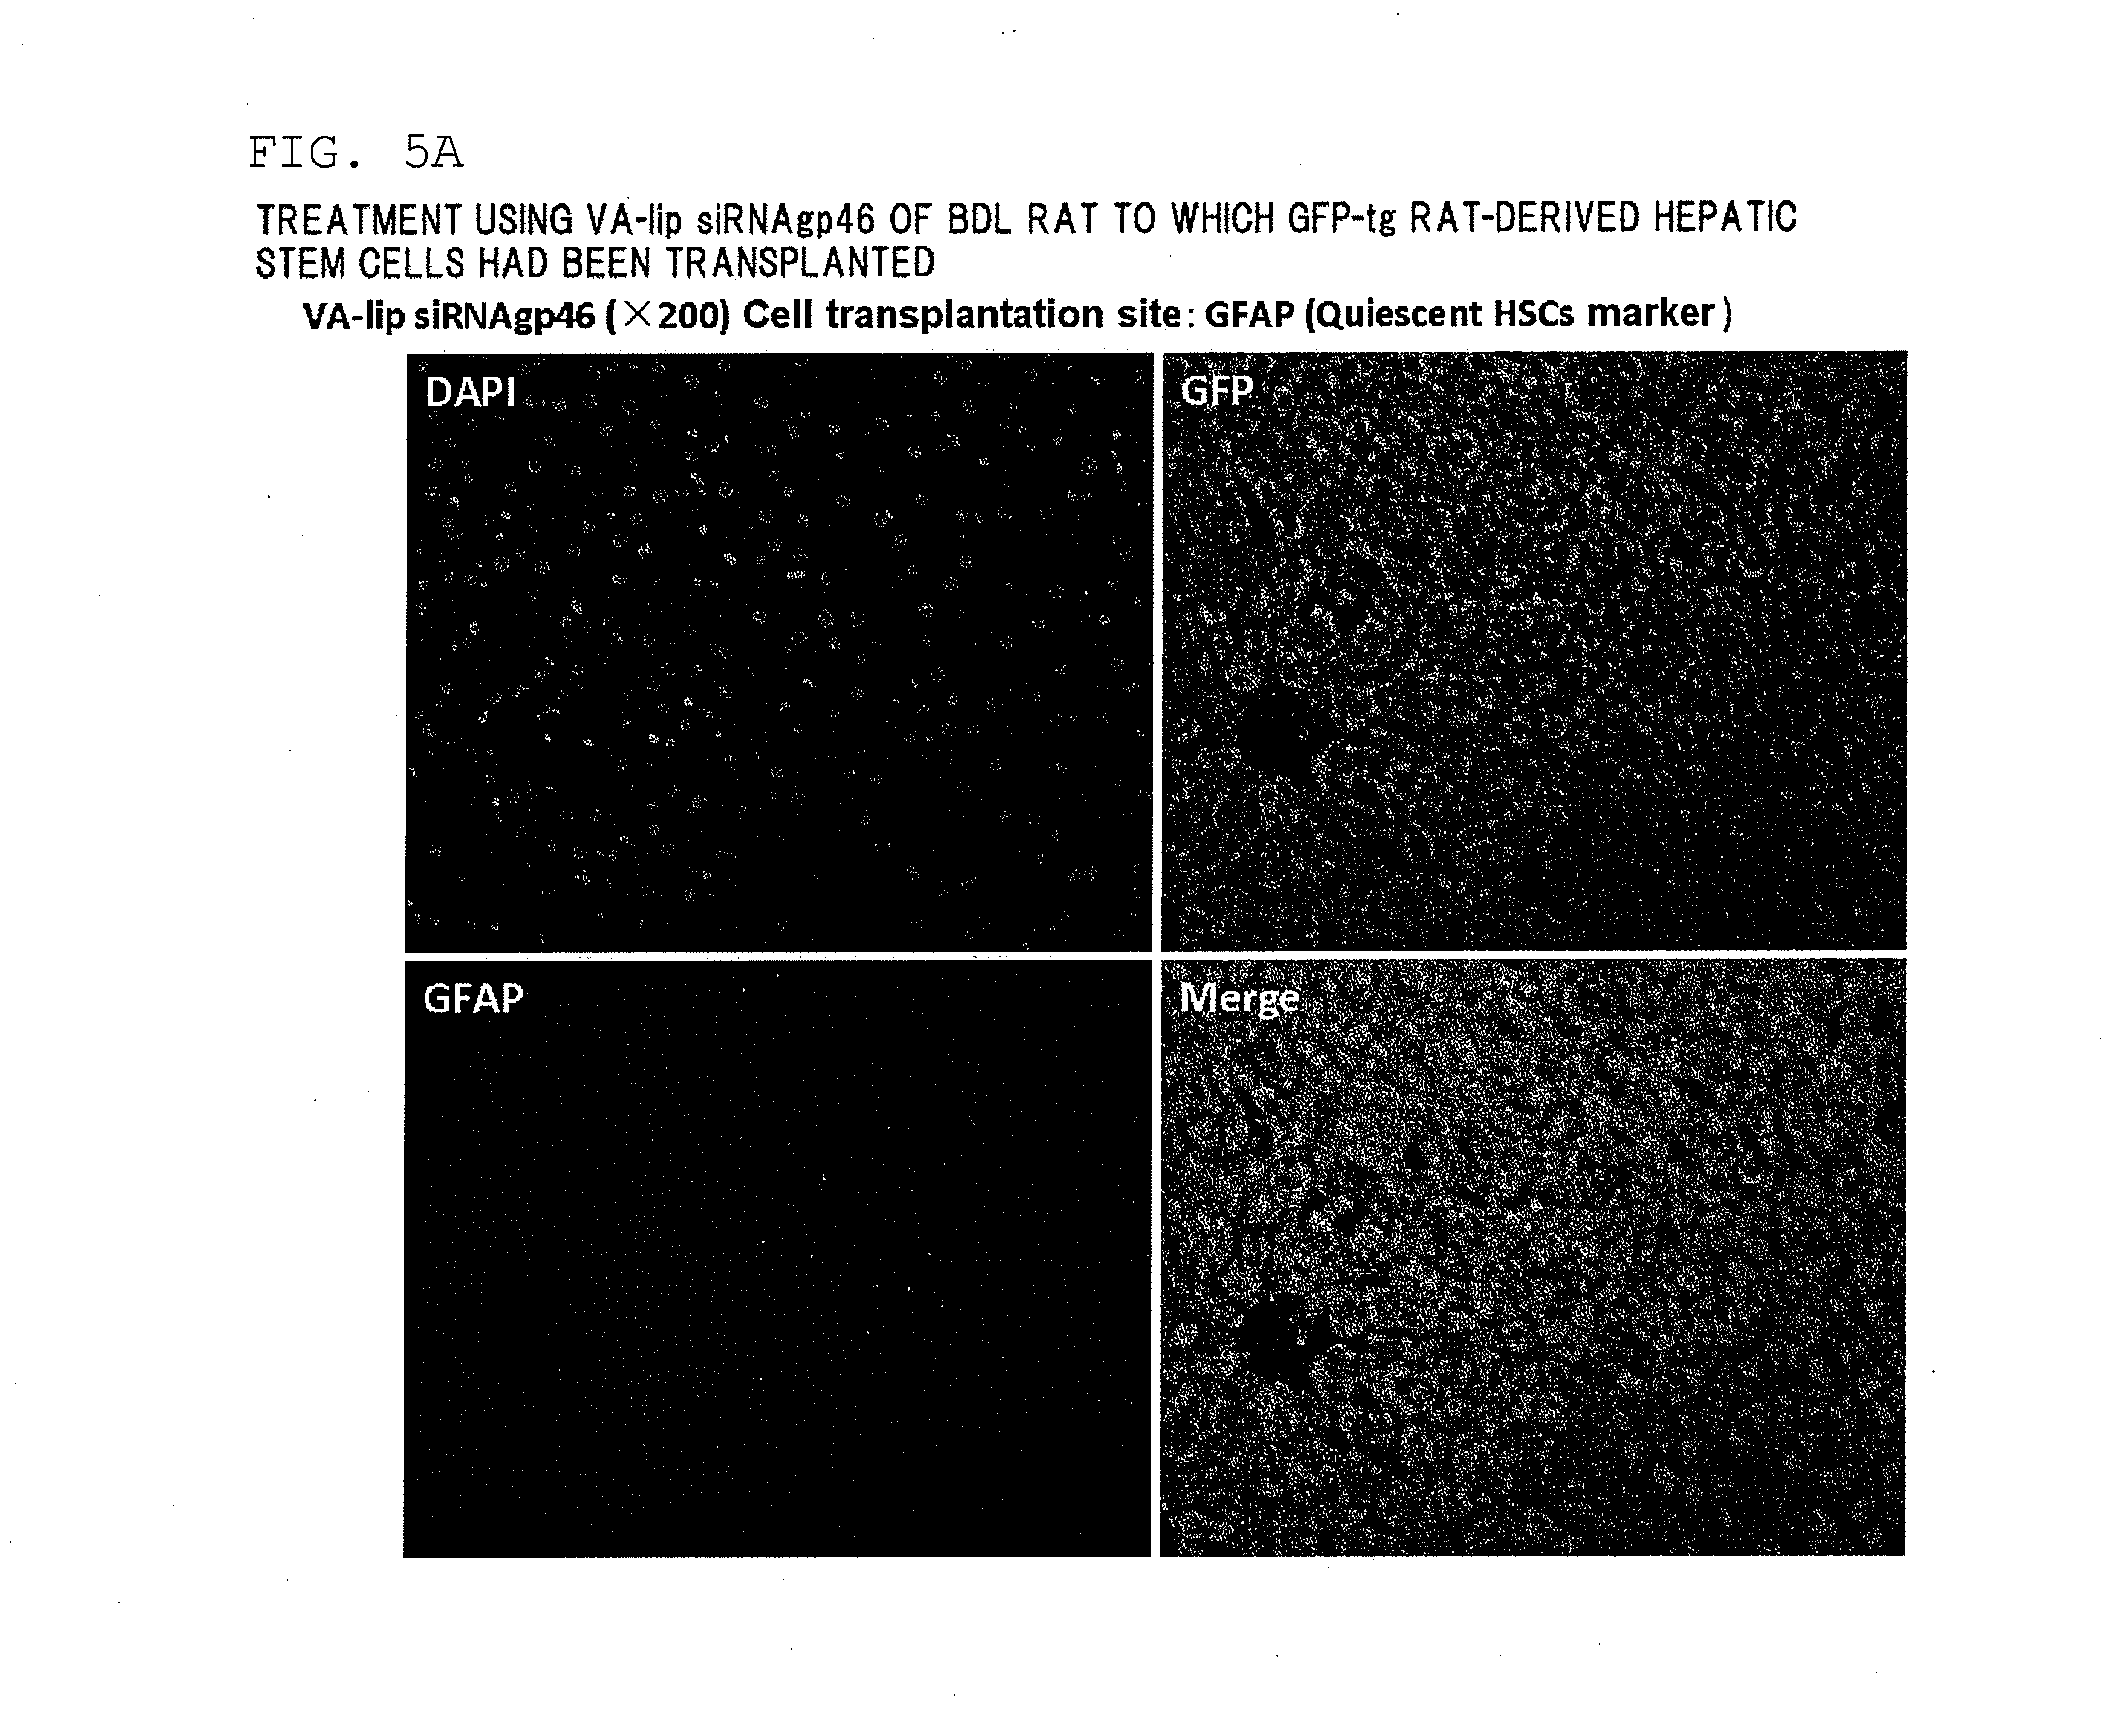 Composition for regenerating normal tissue from fibrotic tissue